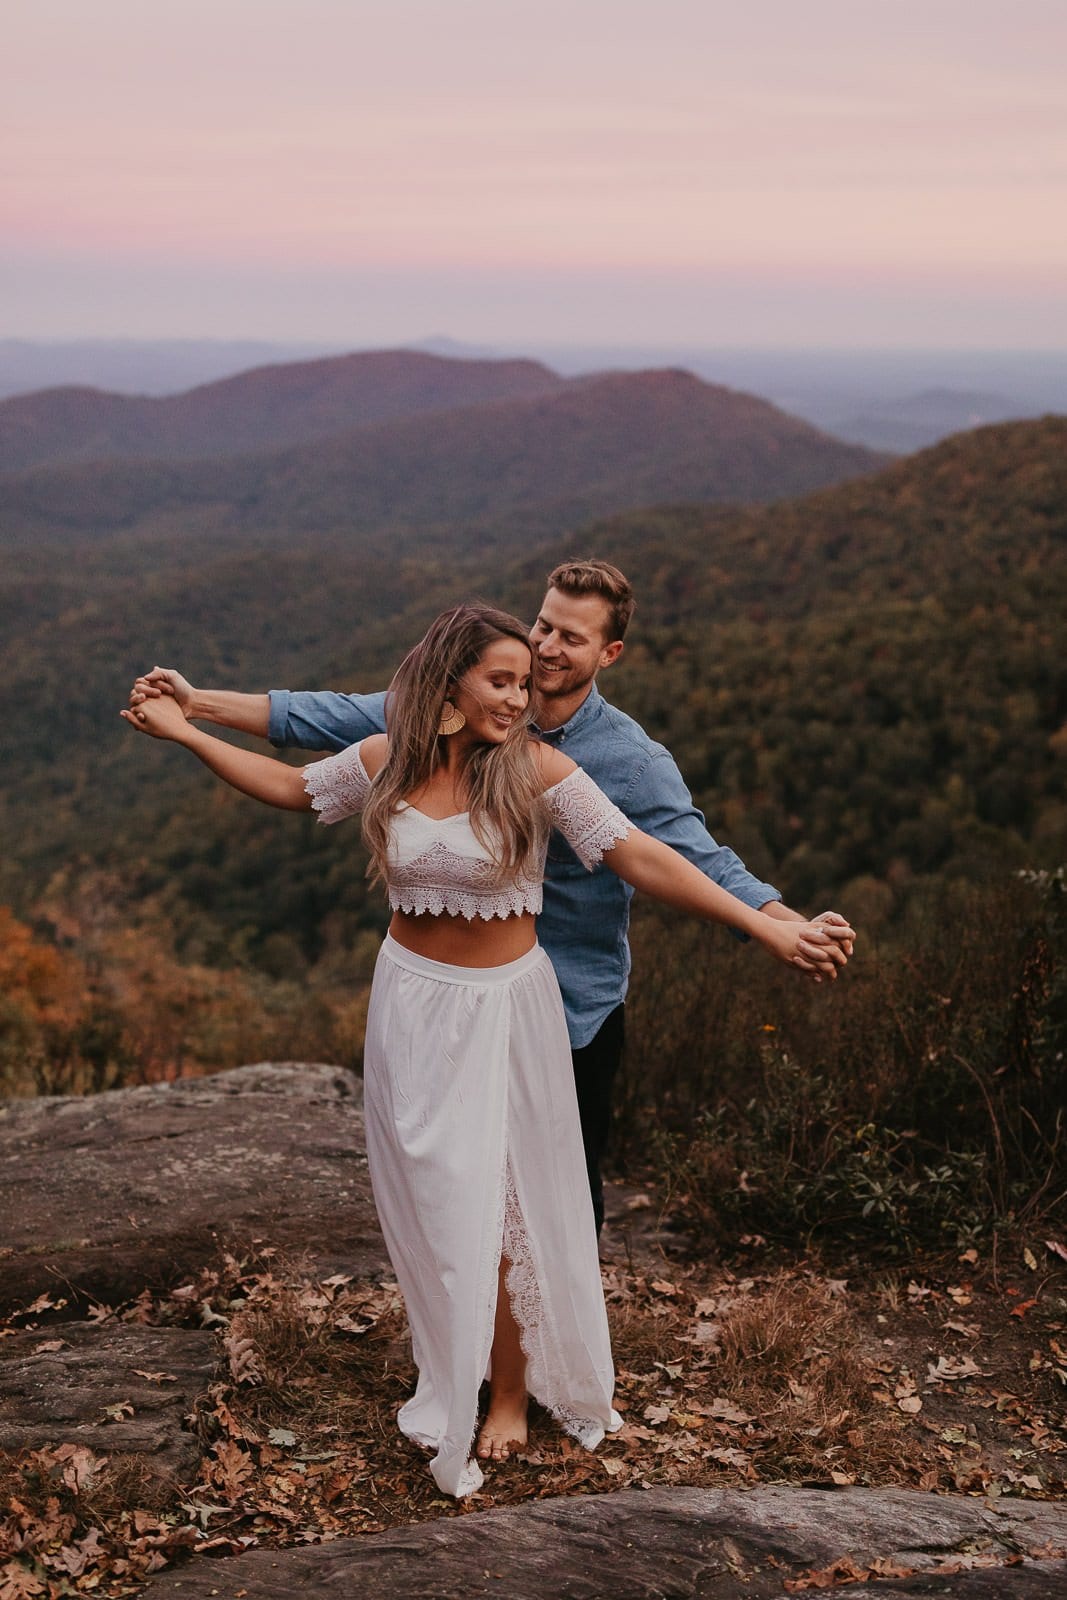 engagement photoshoot that turned into a proposal.